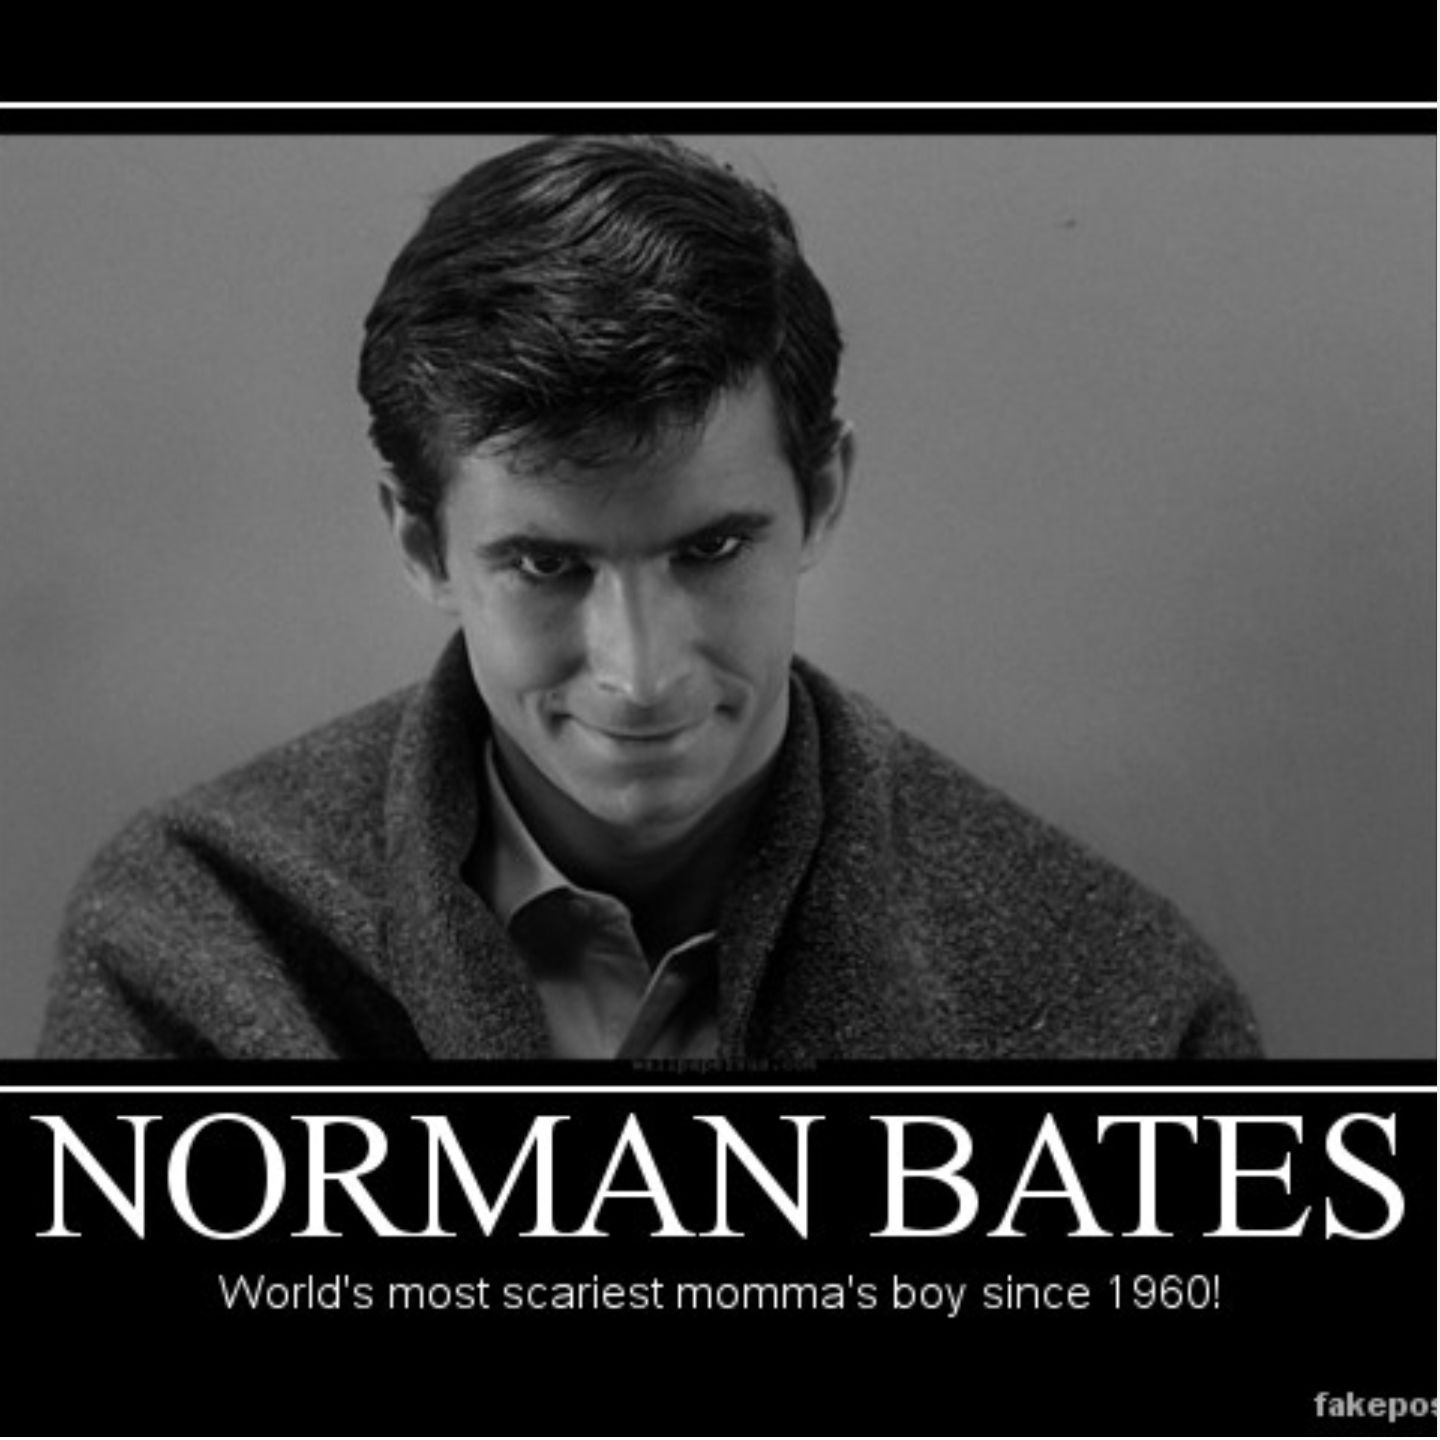 Meme about Norman Bates obsession with his mother. 